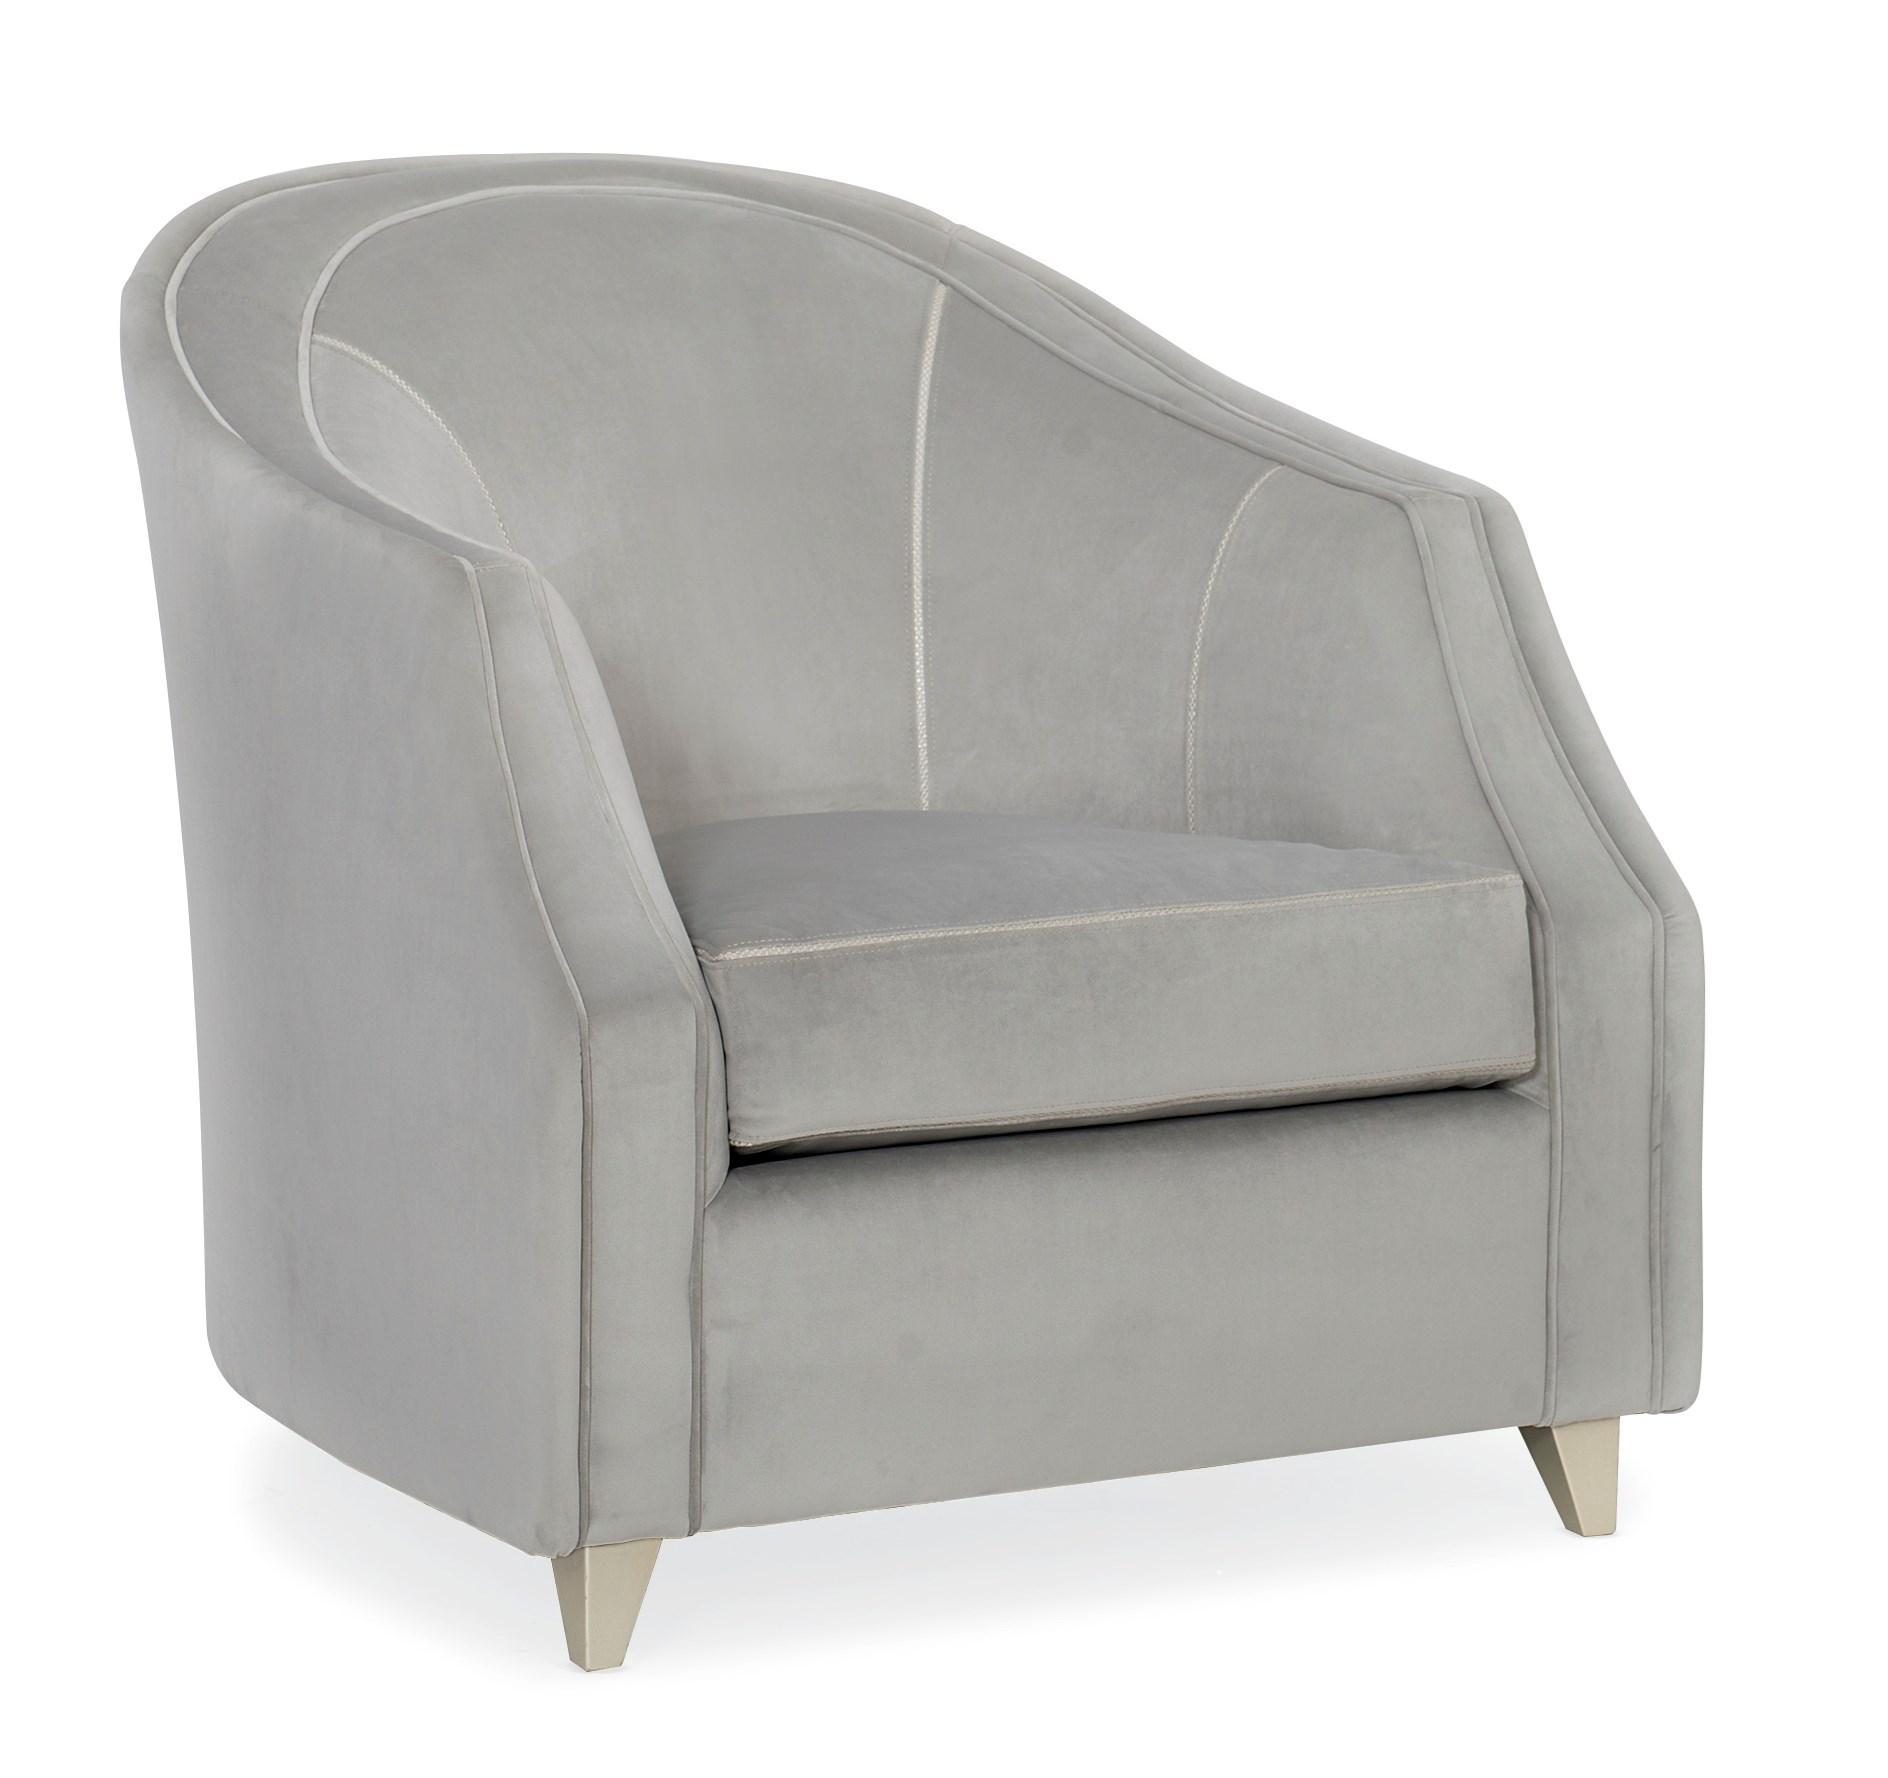 

    
Dove Grey Velvet Fabric & Taupe Paint Finish Accent Chair SEAMS TO ME by Caracole
